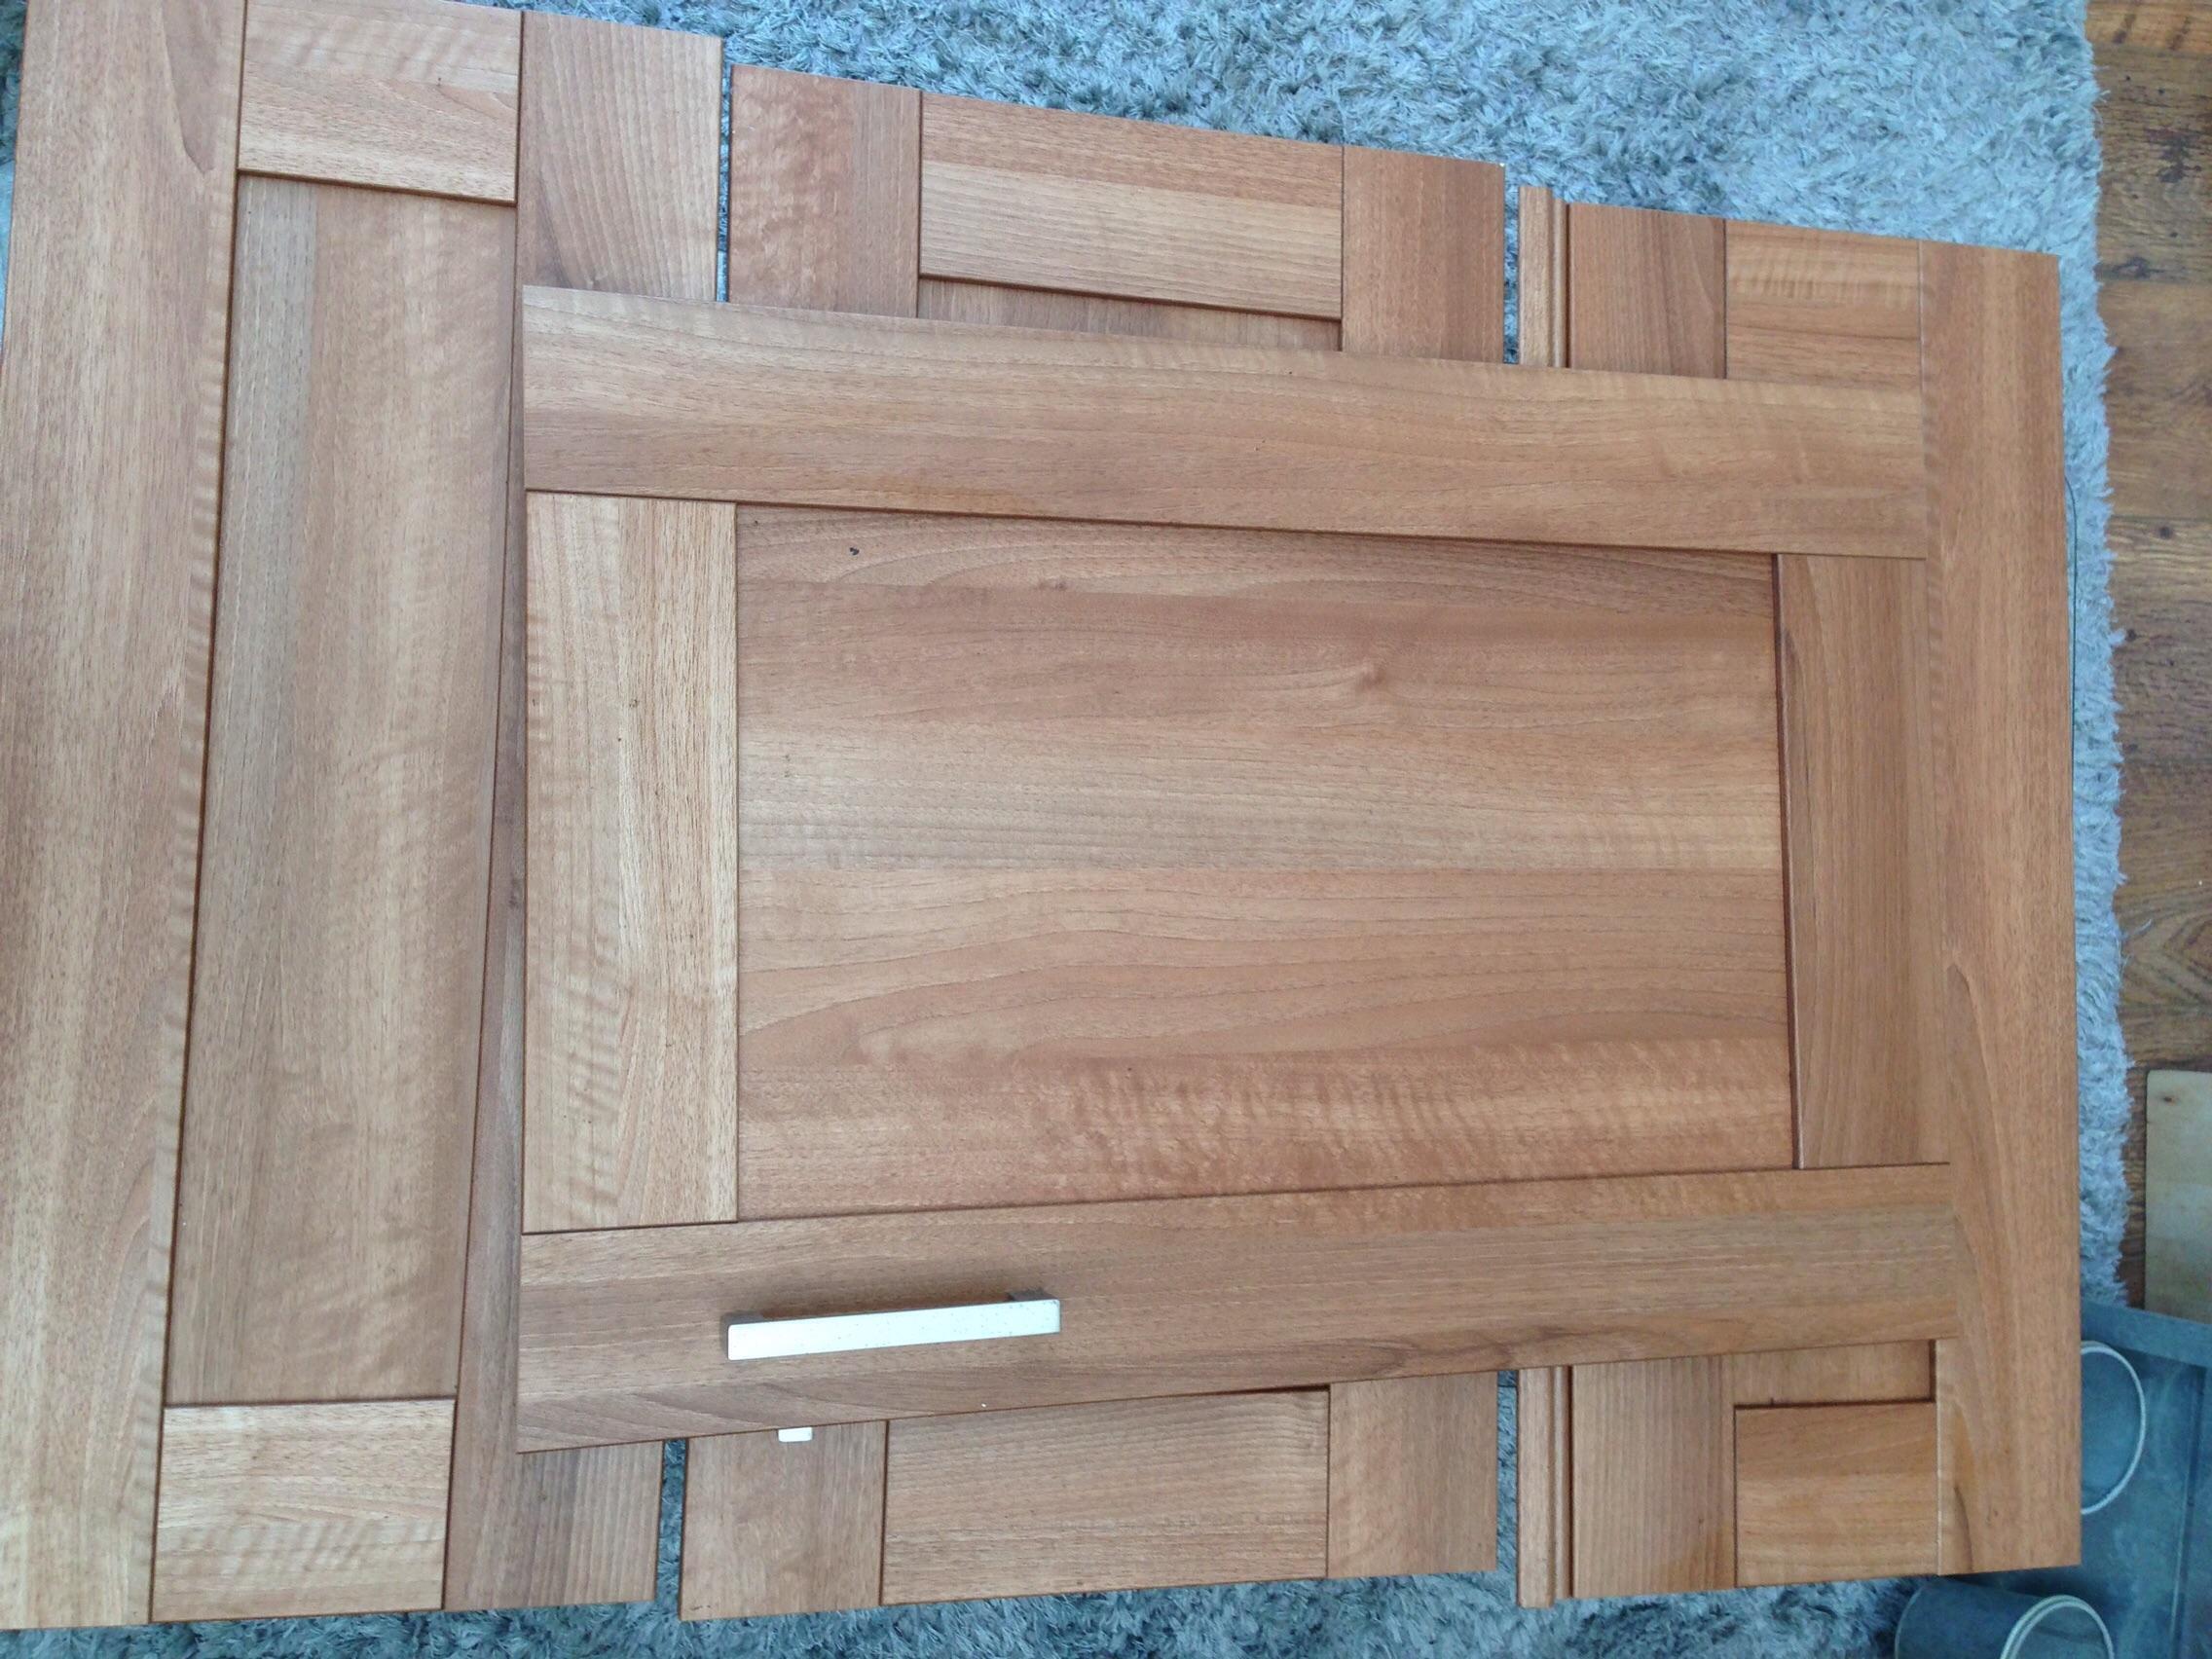 B Q Walnut Effect Kitchen Cabinet Doors X4 In B45 Rubery For 20 00 For Sale Shpock